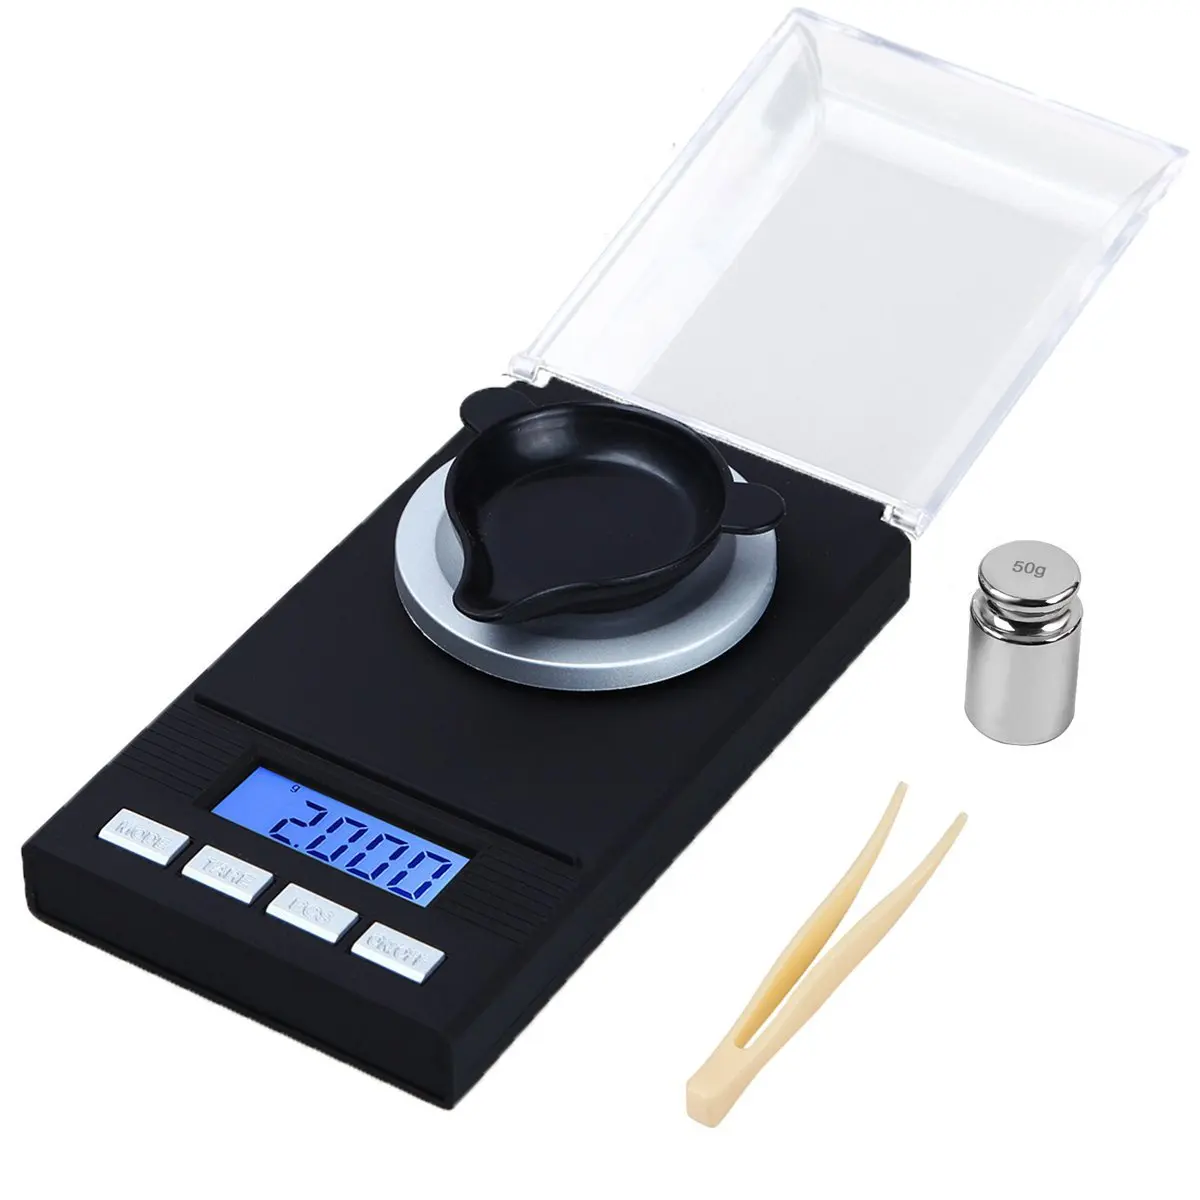 

Amazon hot selling high 20g 0.001g digital weigh scale electronic platform weighing scale, Black